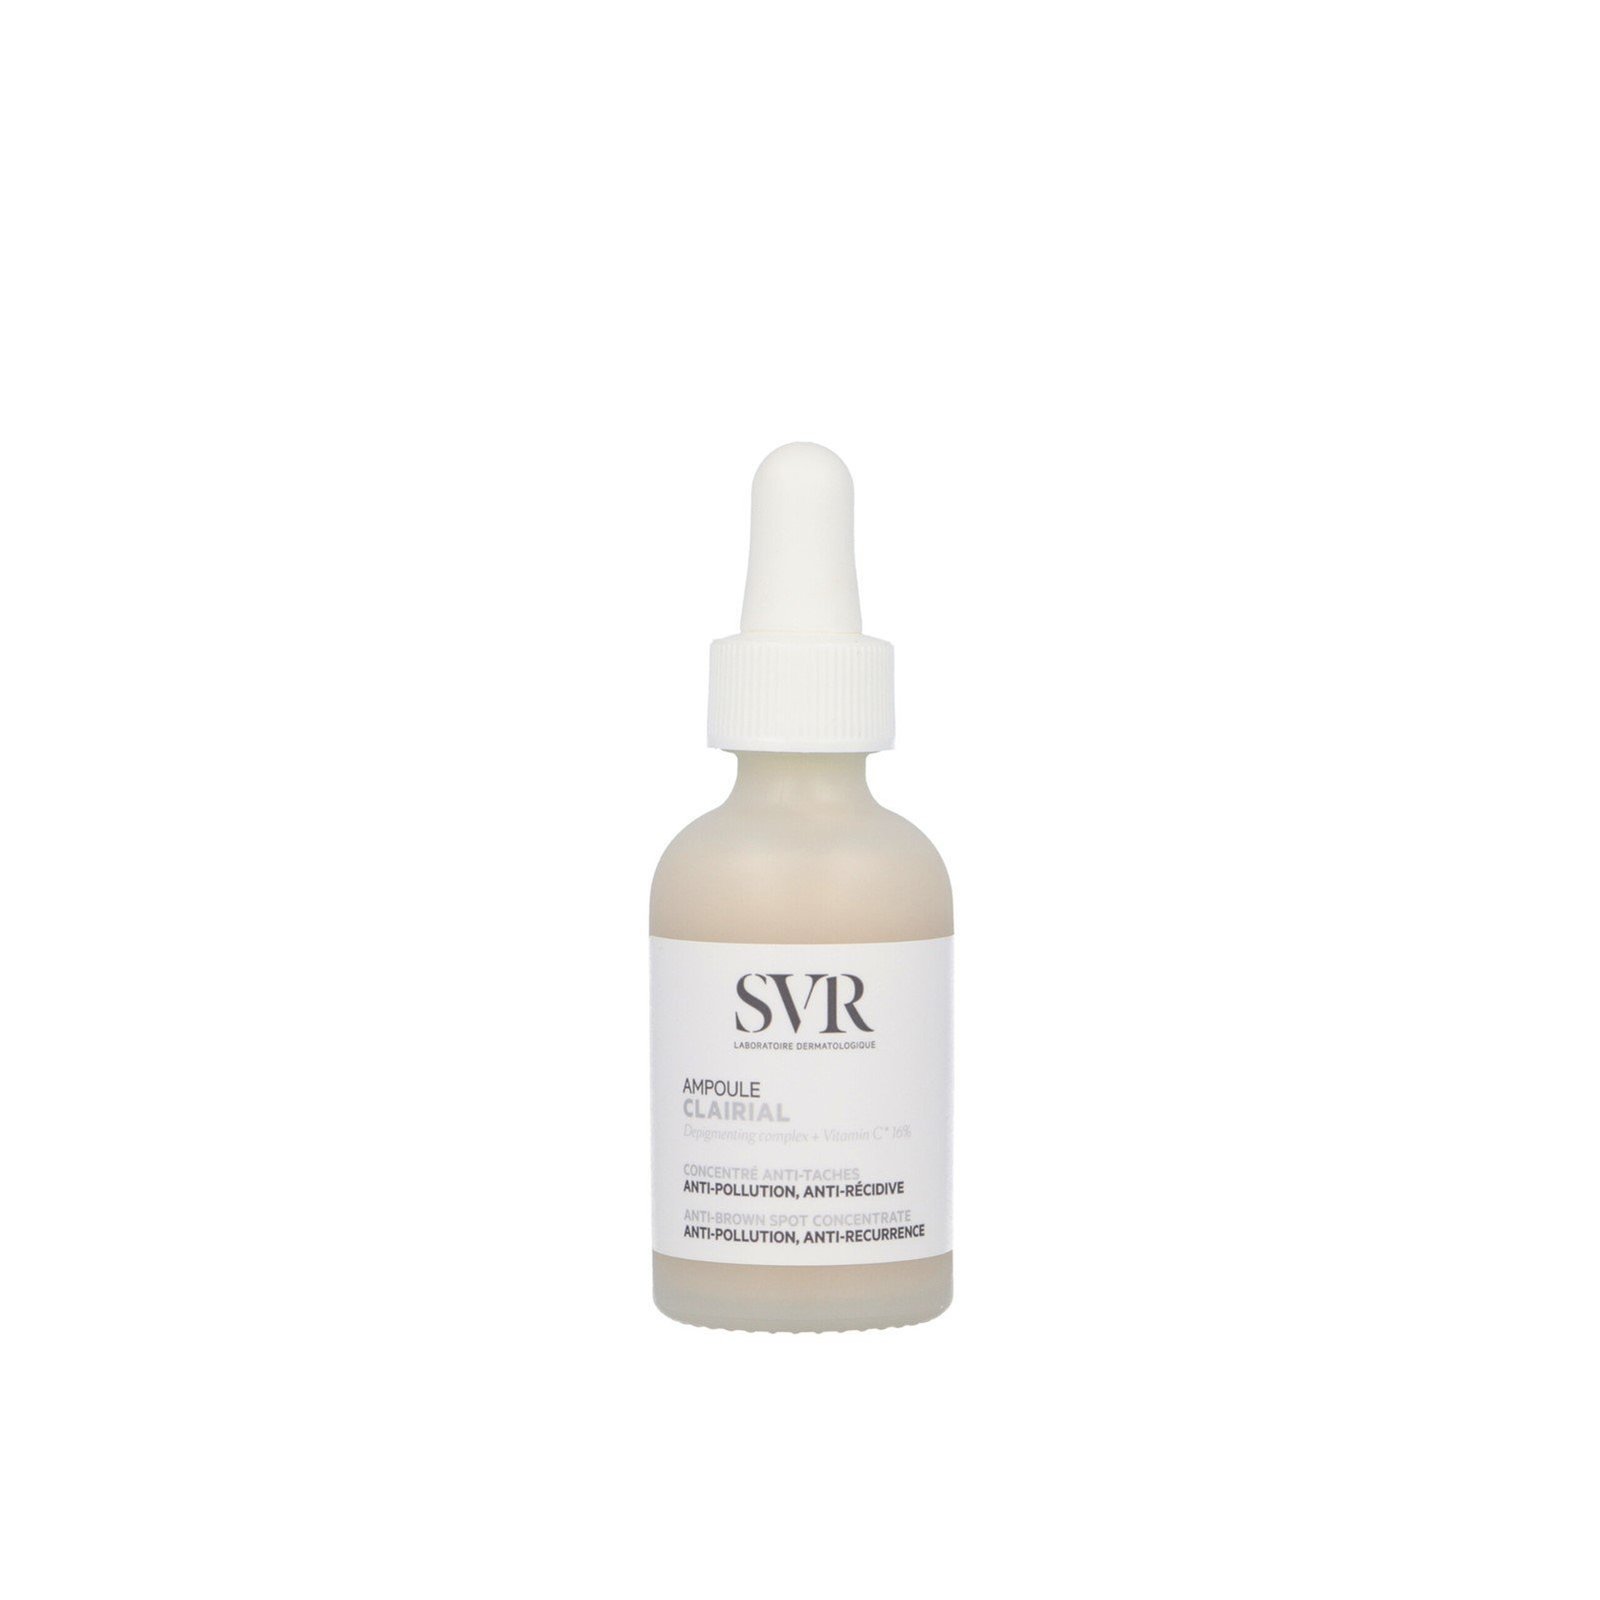 SVR Clairial Anti-Brown Spot Concentrate Ampoule 30ml